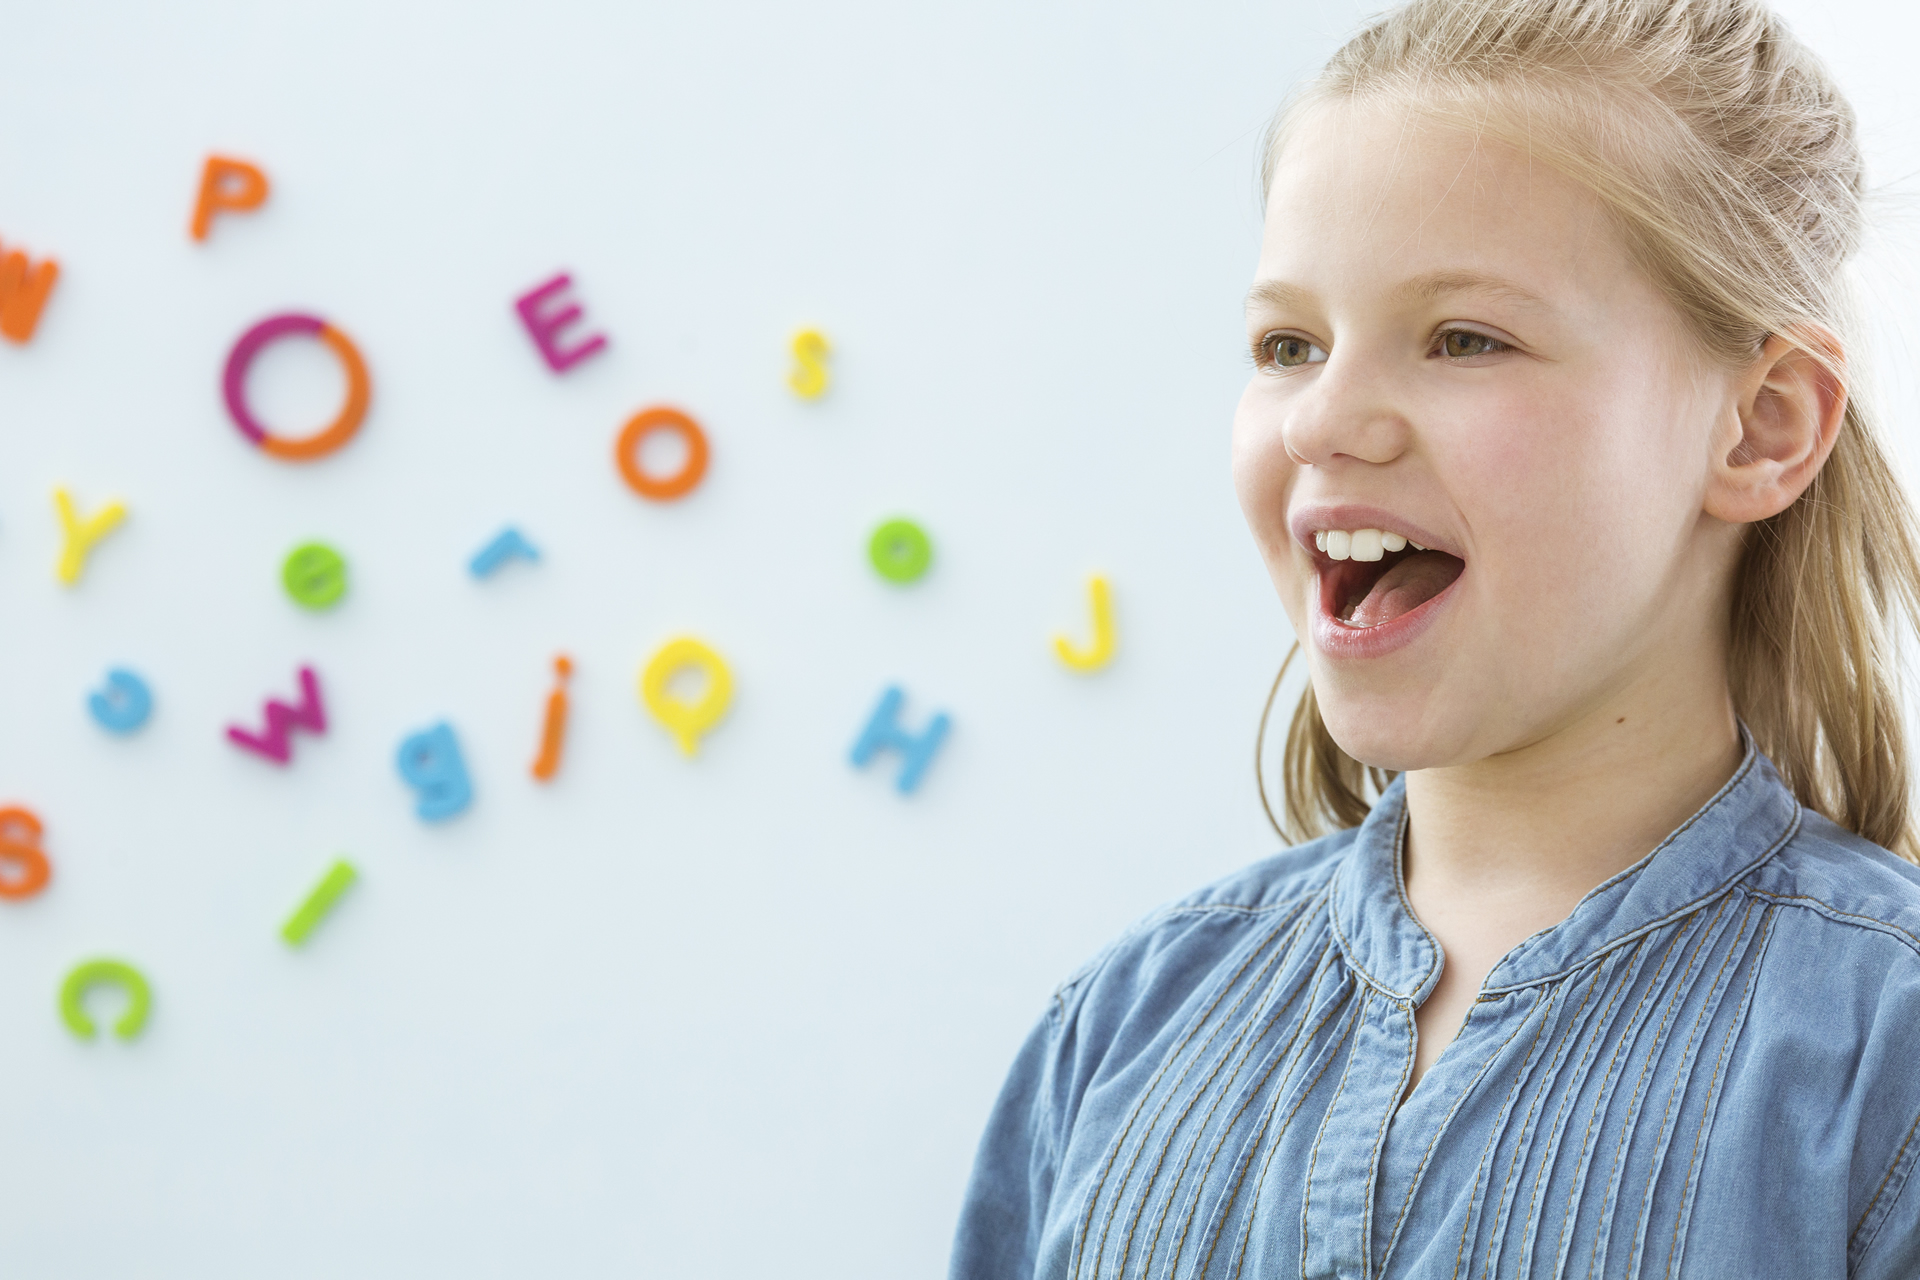 Let’s Communicate - Pediatric Therapy Services is a place for children to develop socially and cogni Let’s Communicate - Pediatric Therapy Services Winder (678)963-0694